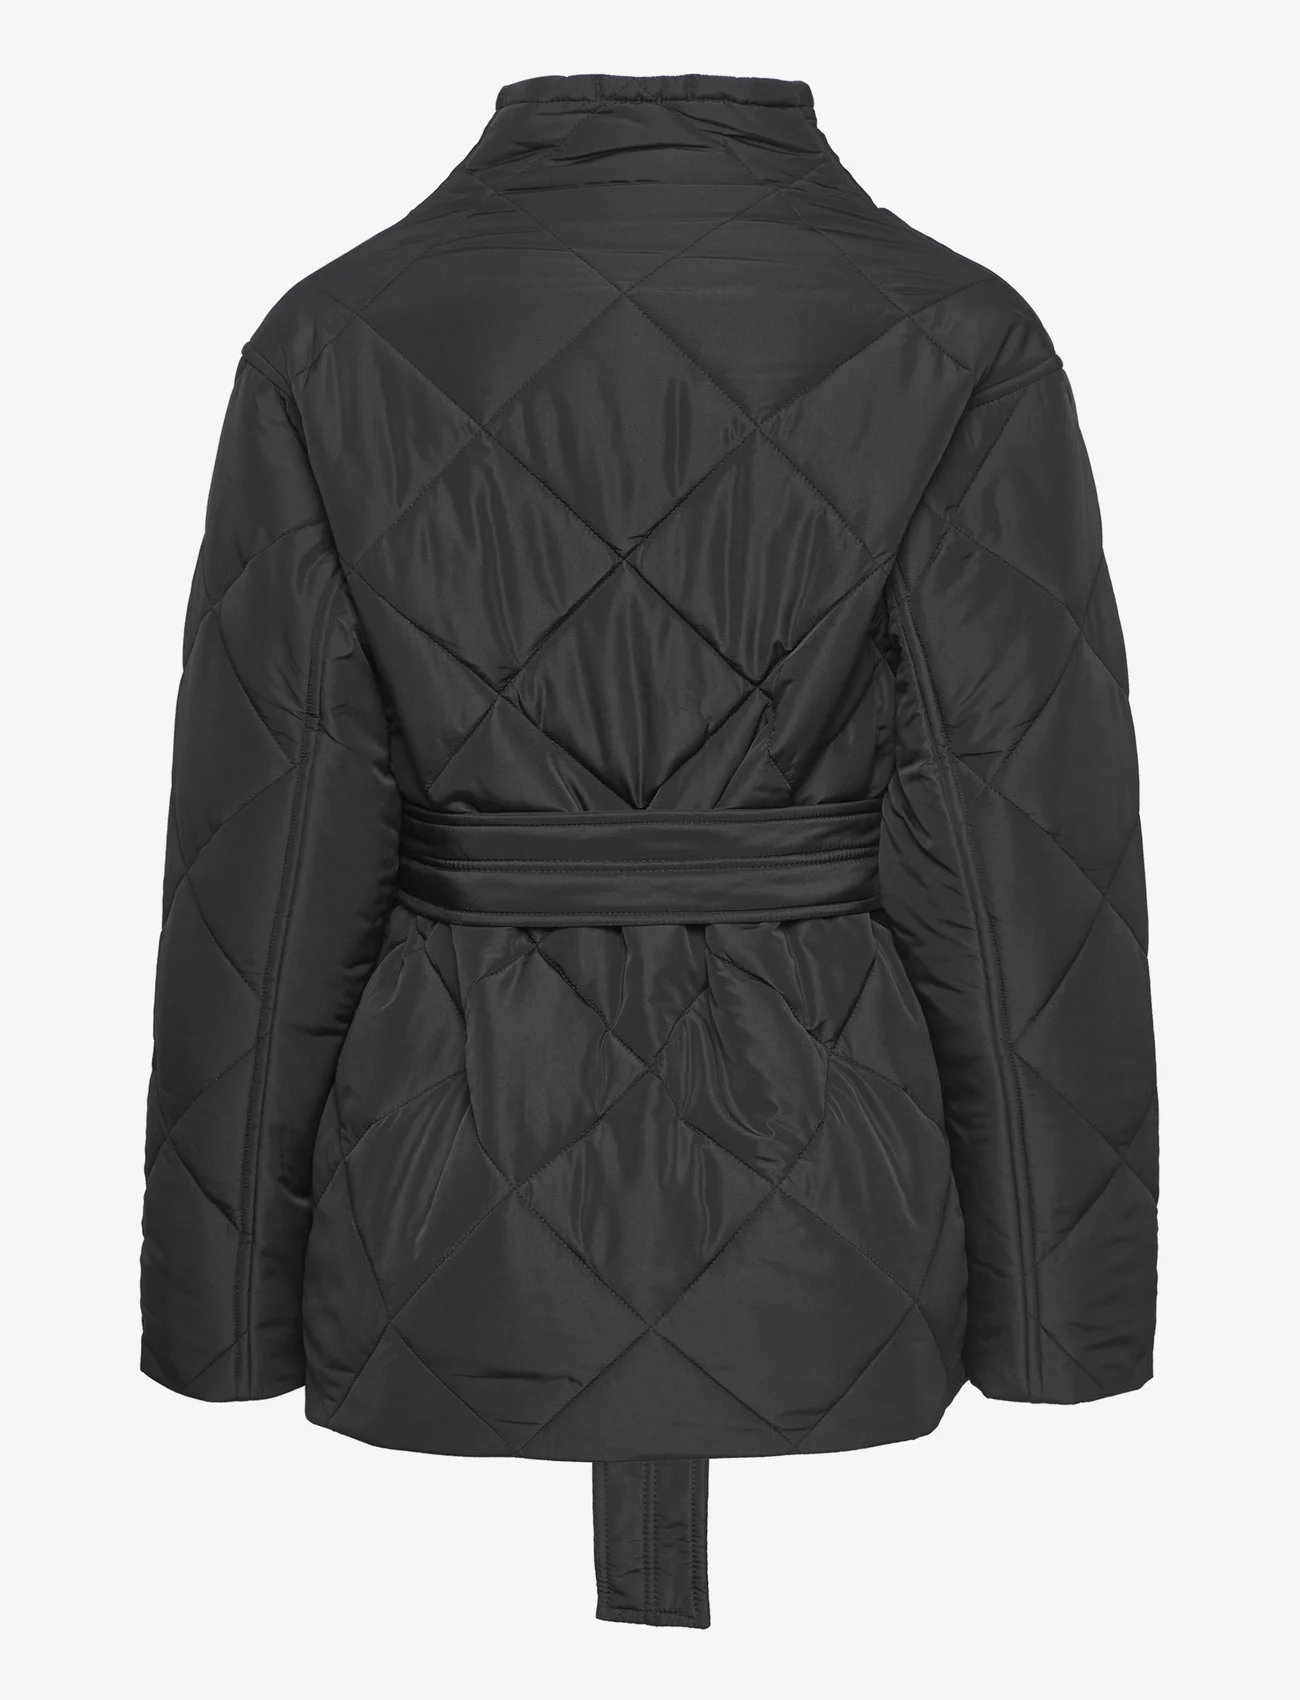 NORR - Alma quilted short jacket - quilted jackets - black - 1